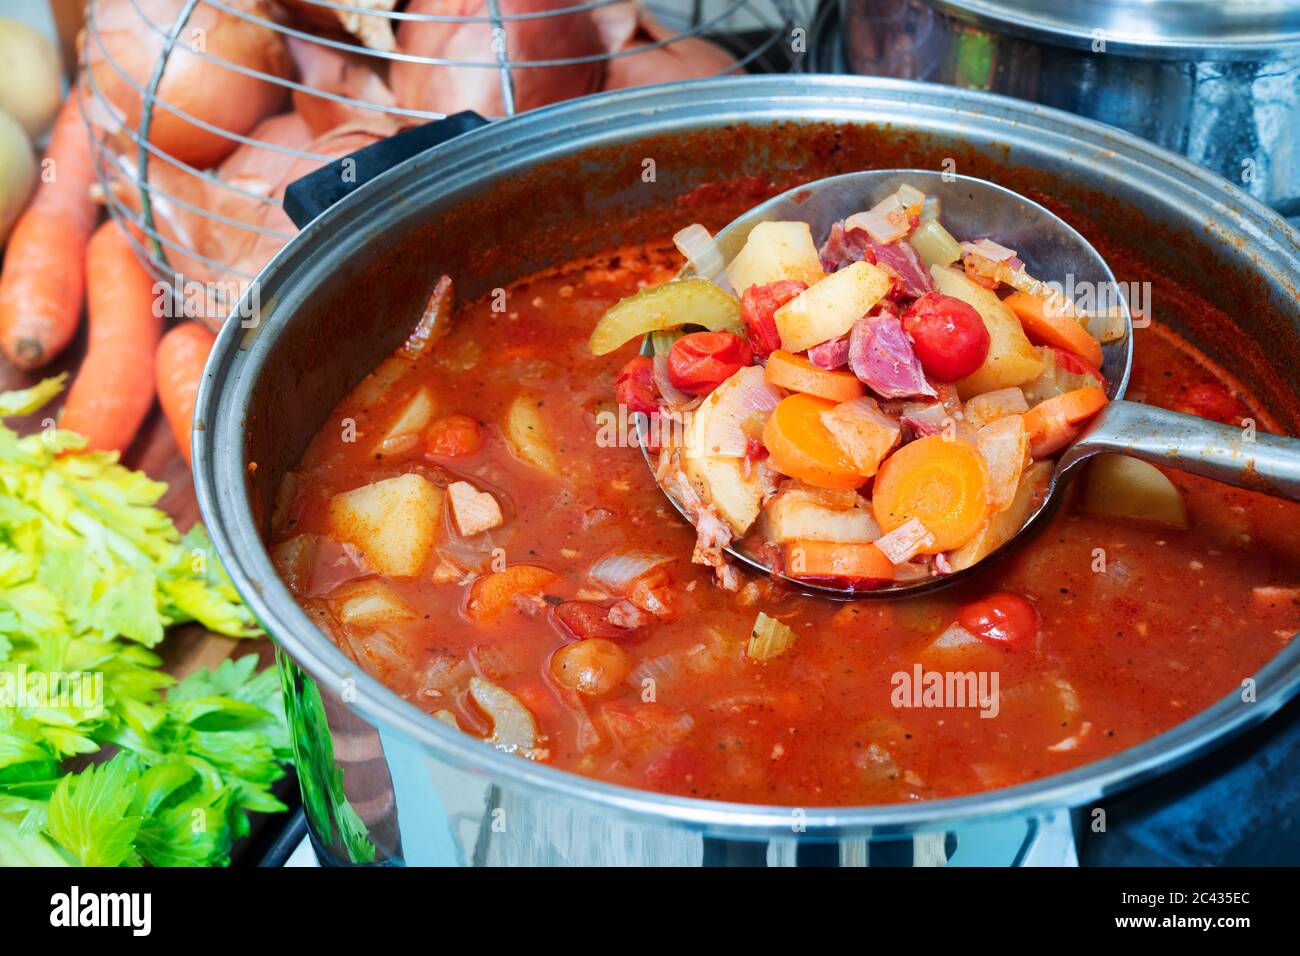 Vegetable and ham hock soup in a pot. Stock Photo